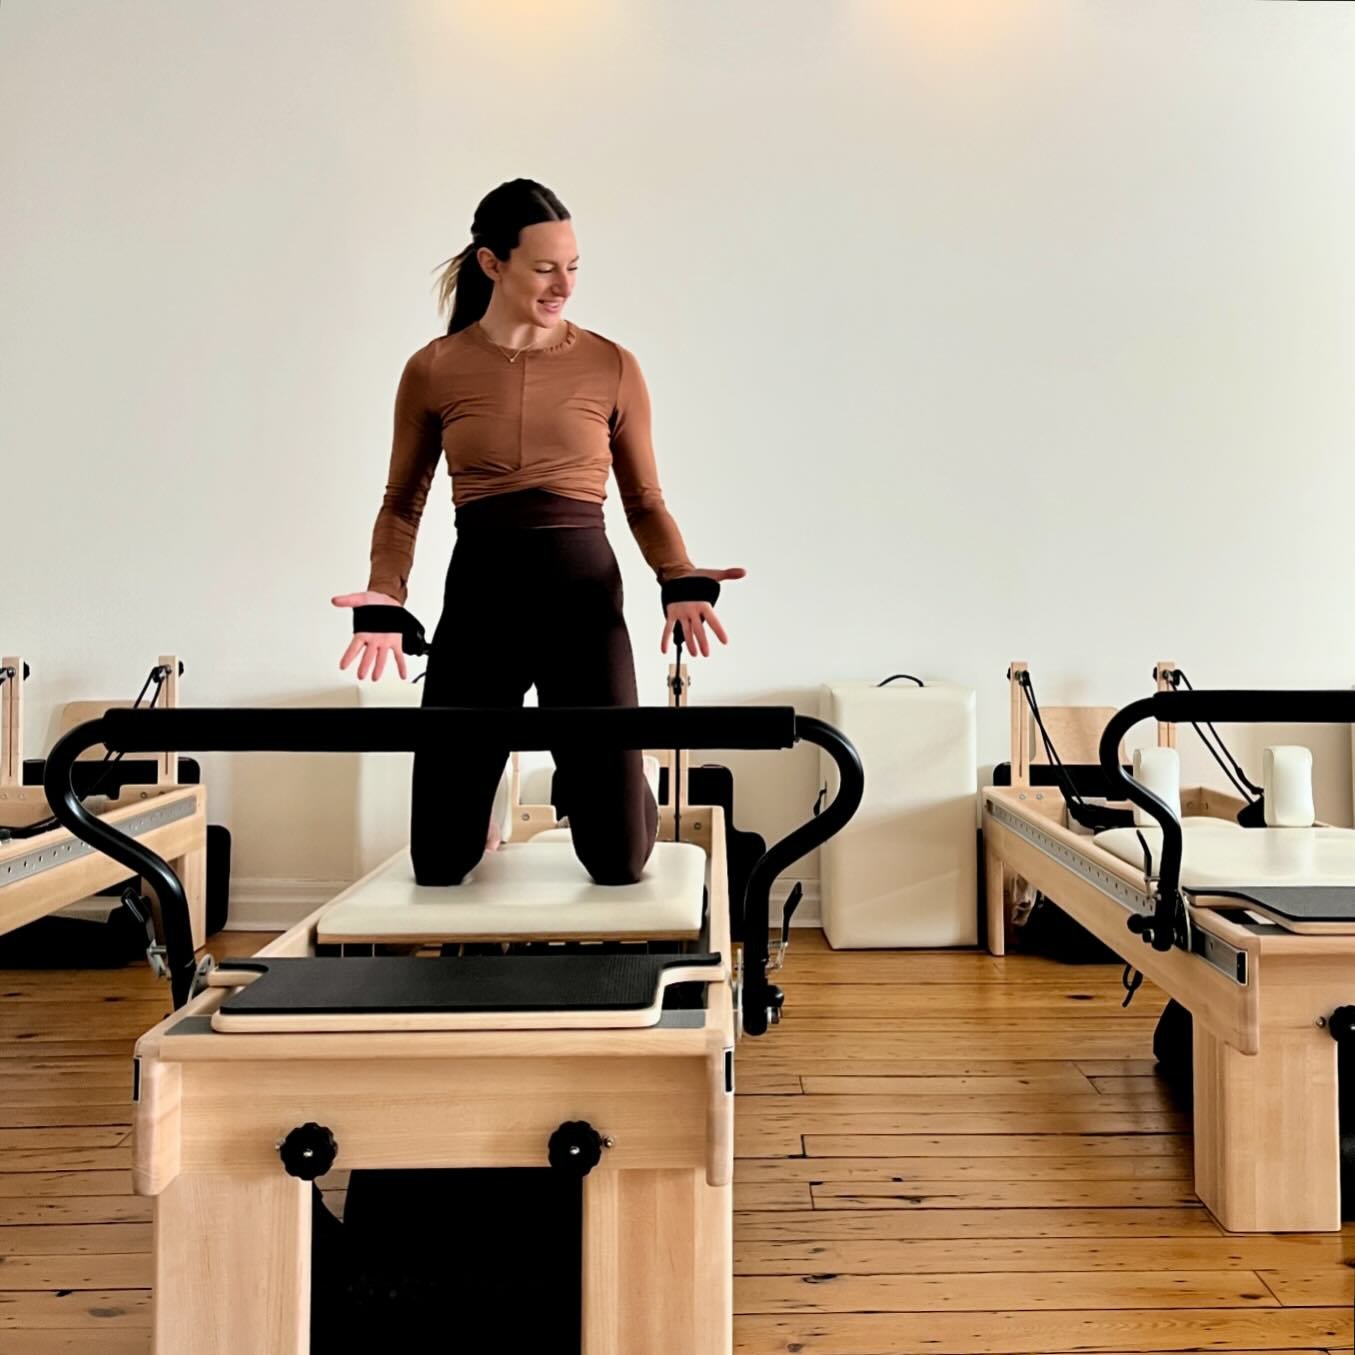 working with tension is a fundamental part of Reformer Pilates, where the resistance provided (or not provided) by the springs challenges the body to build strength and fine tune our adaptability skills.

Cultivating a deeper awareness of how tension